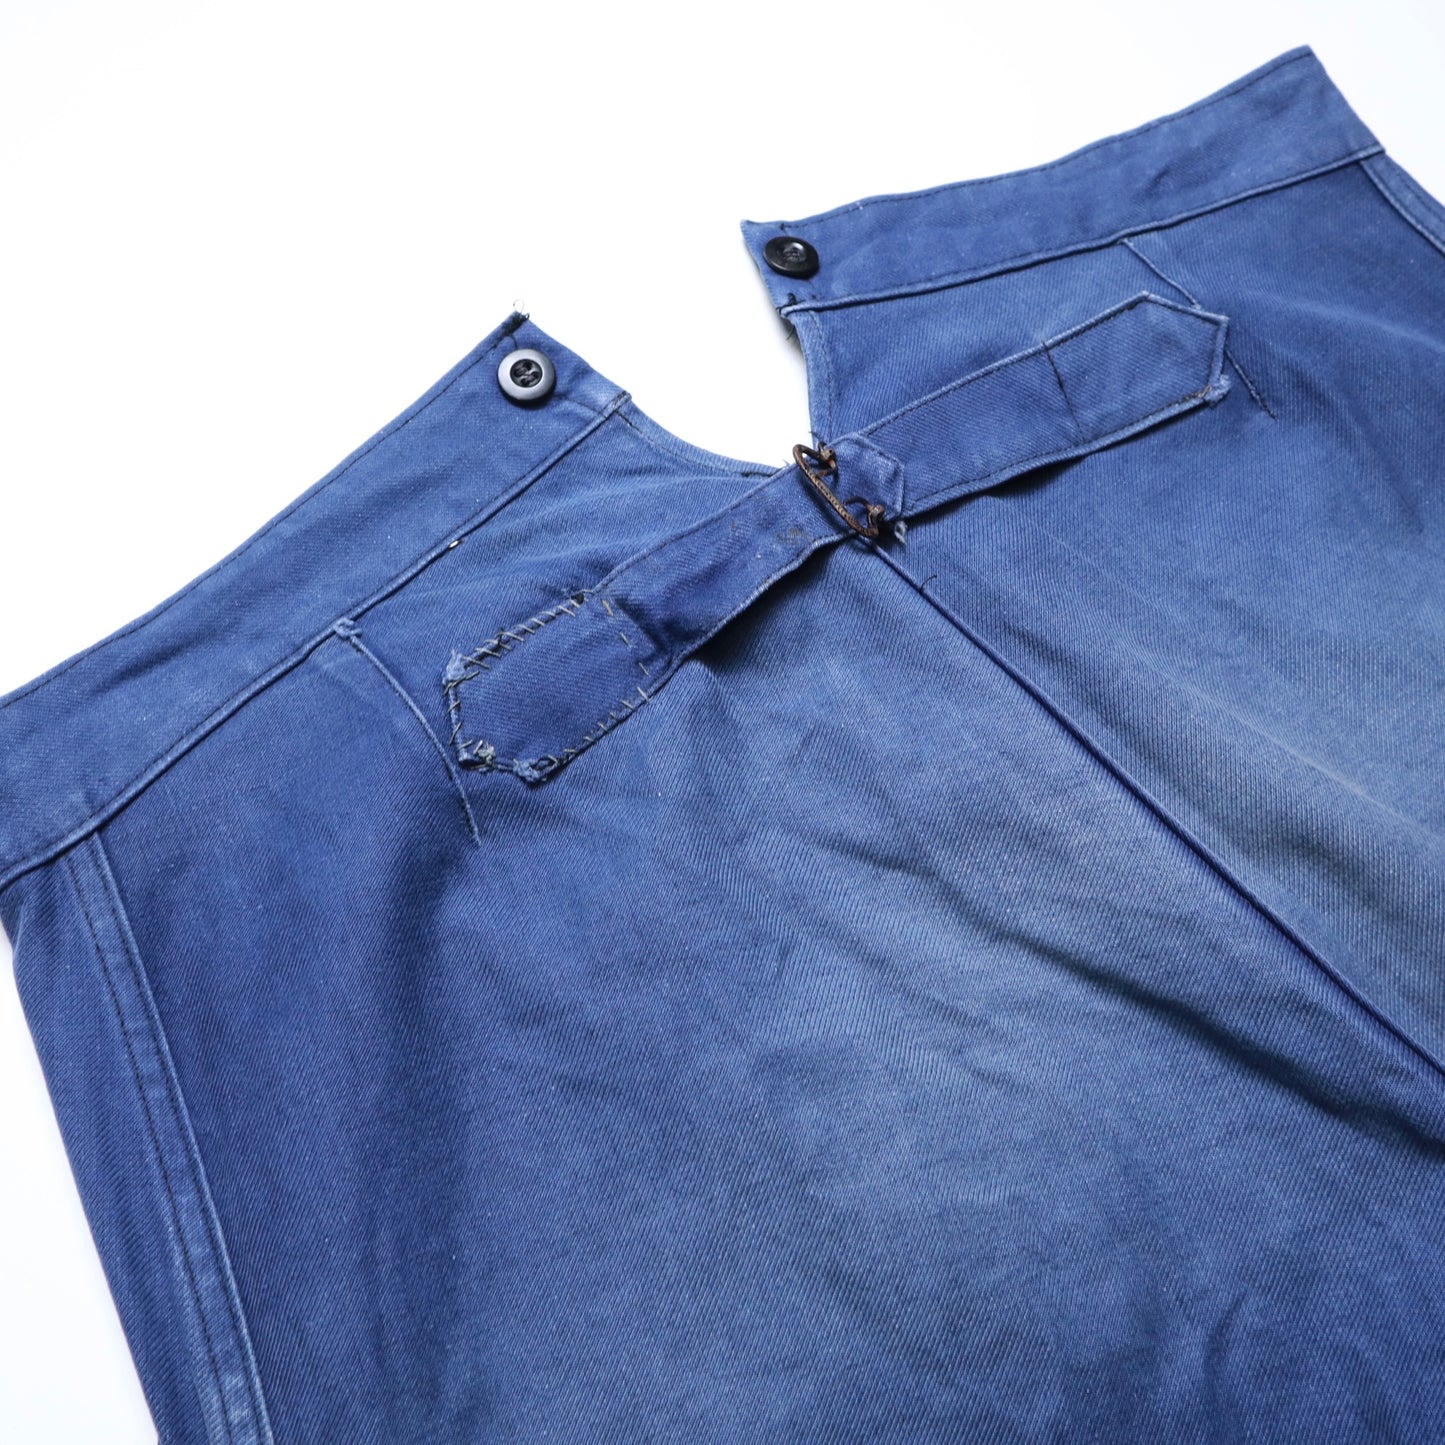 (34W) 1960's KIDUR Faded cotton work trousers 法國工作褲